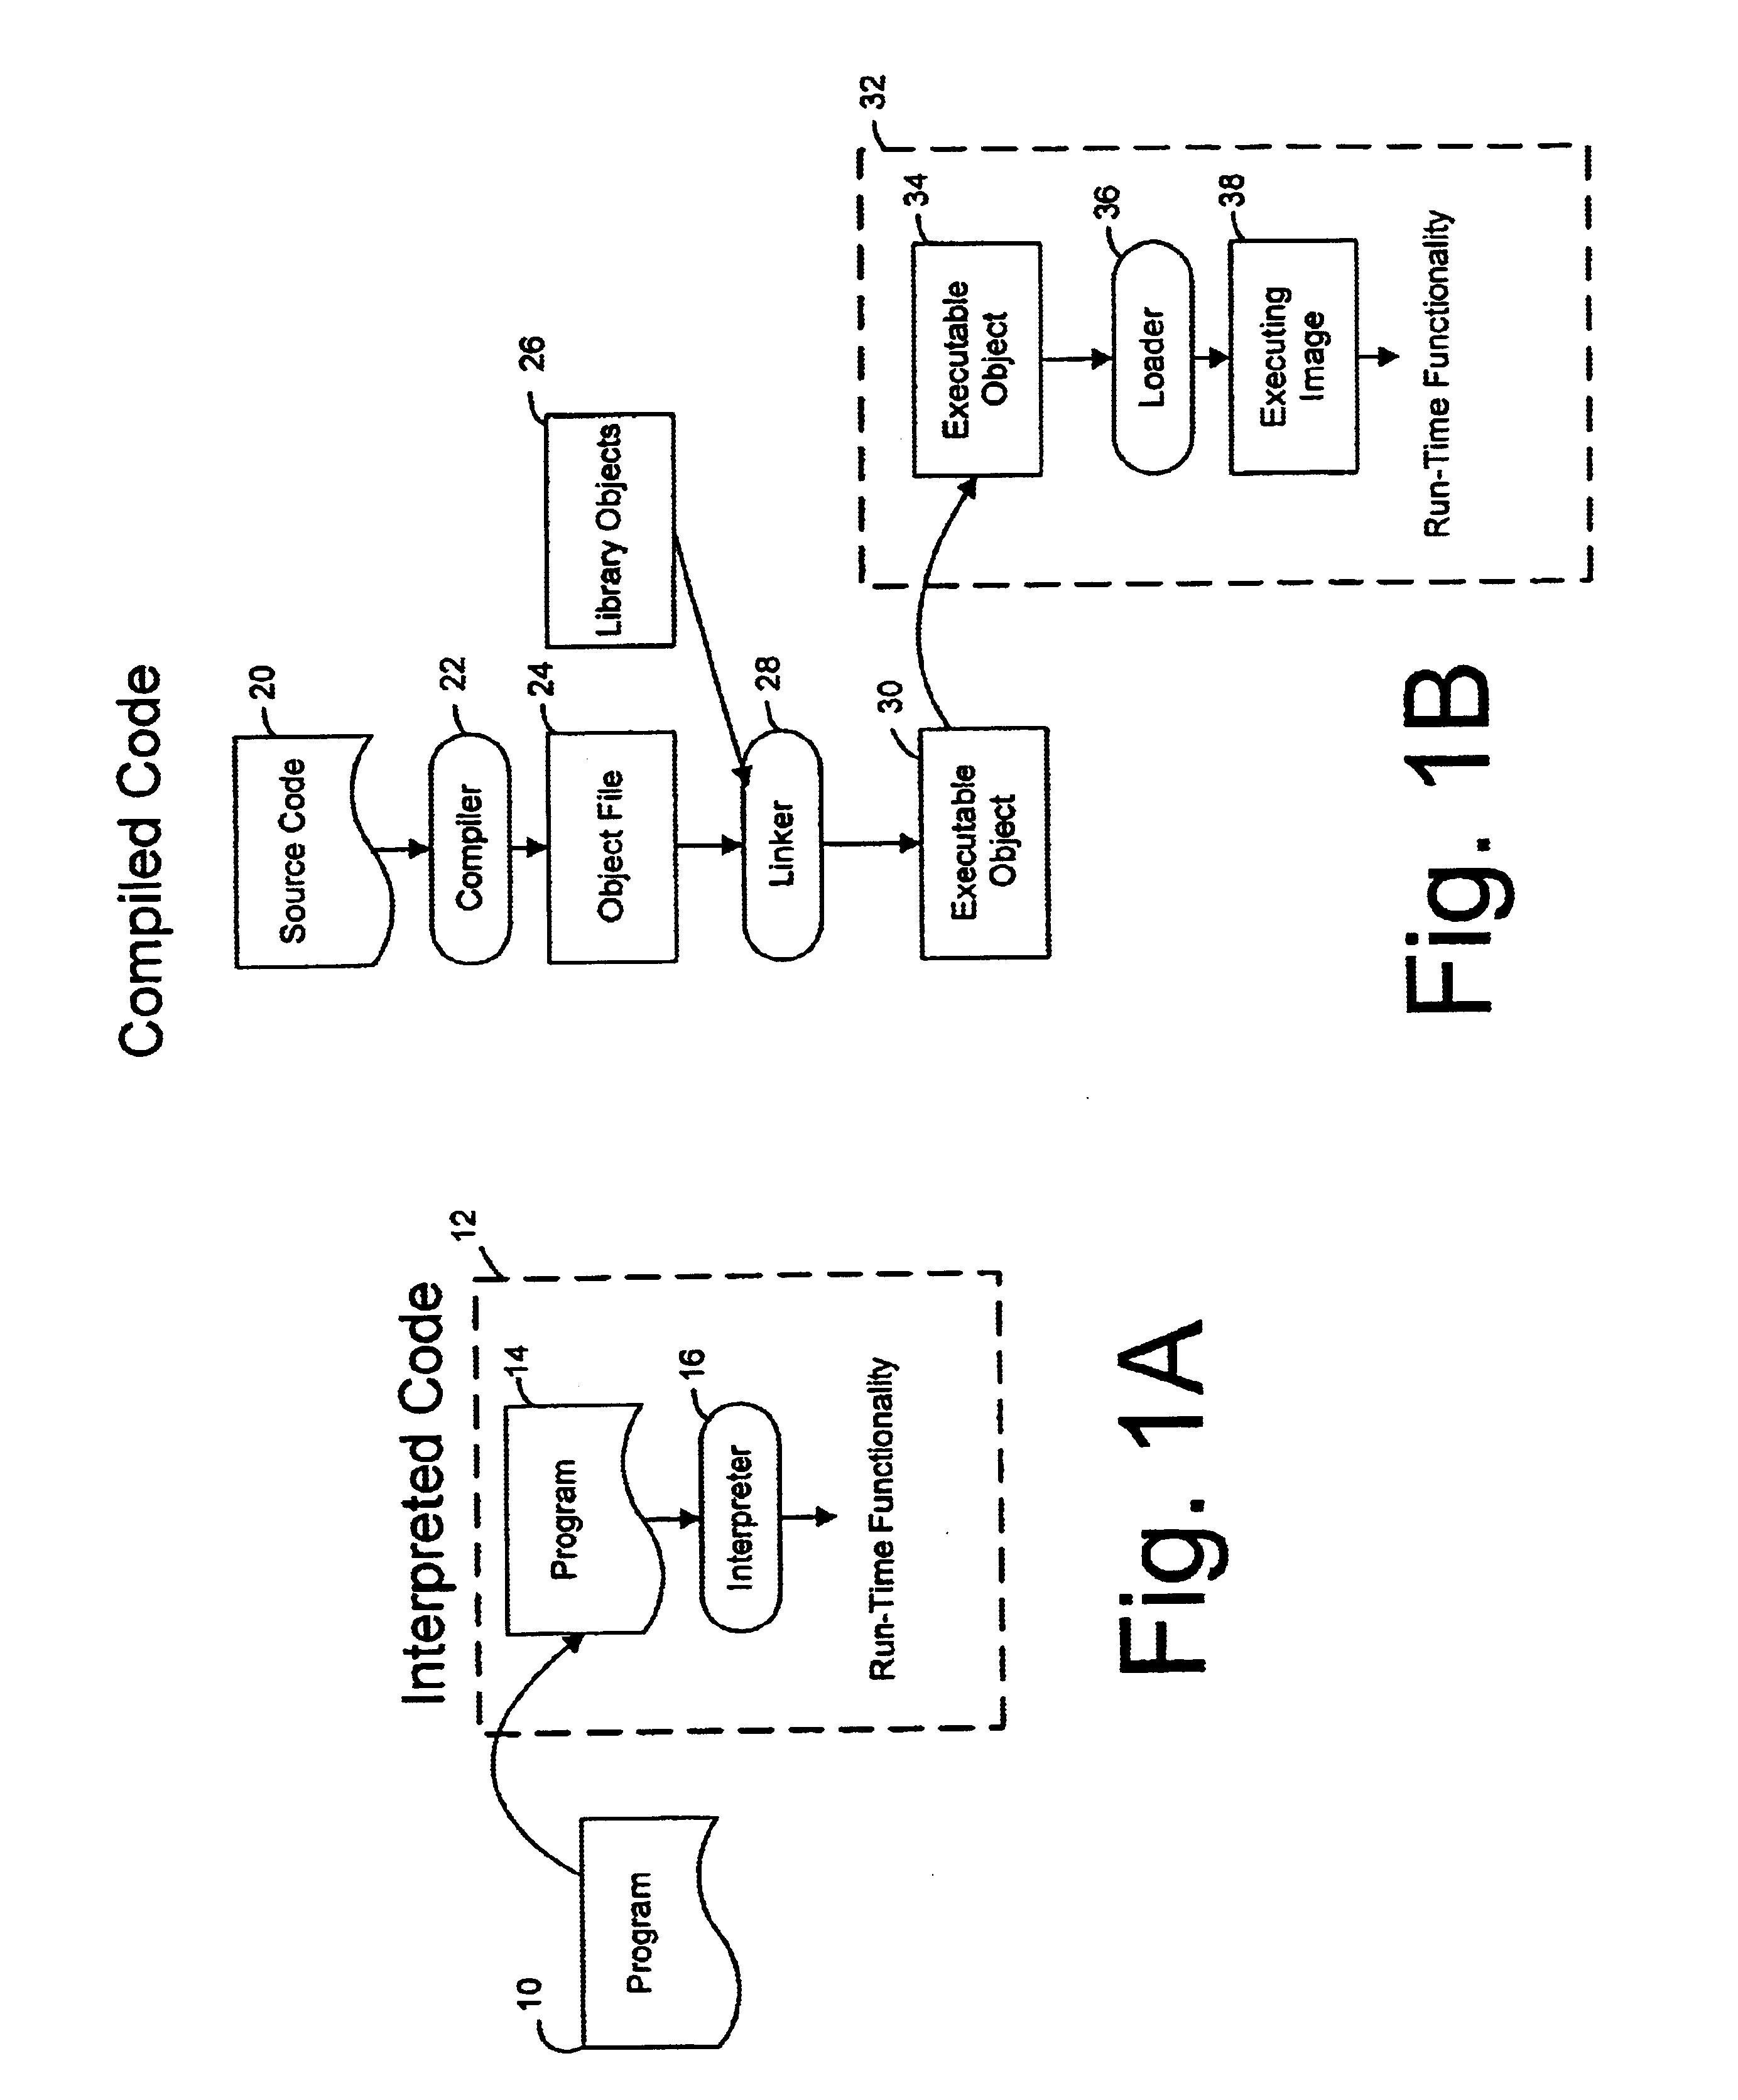 System for modifying the functionality of compiled computer code at run-time